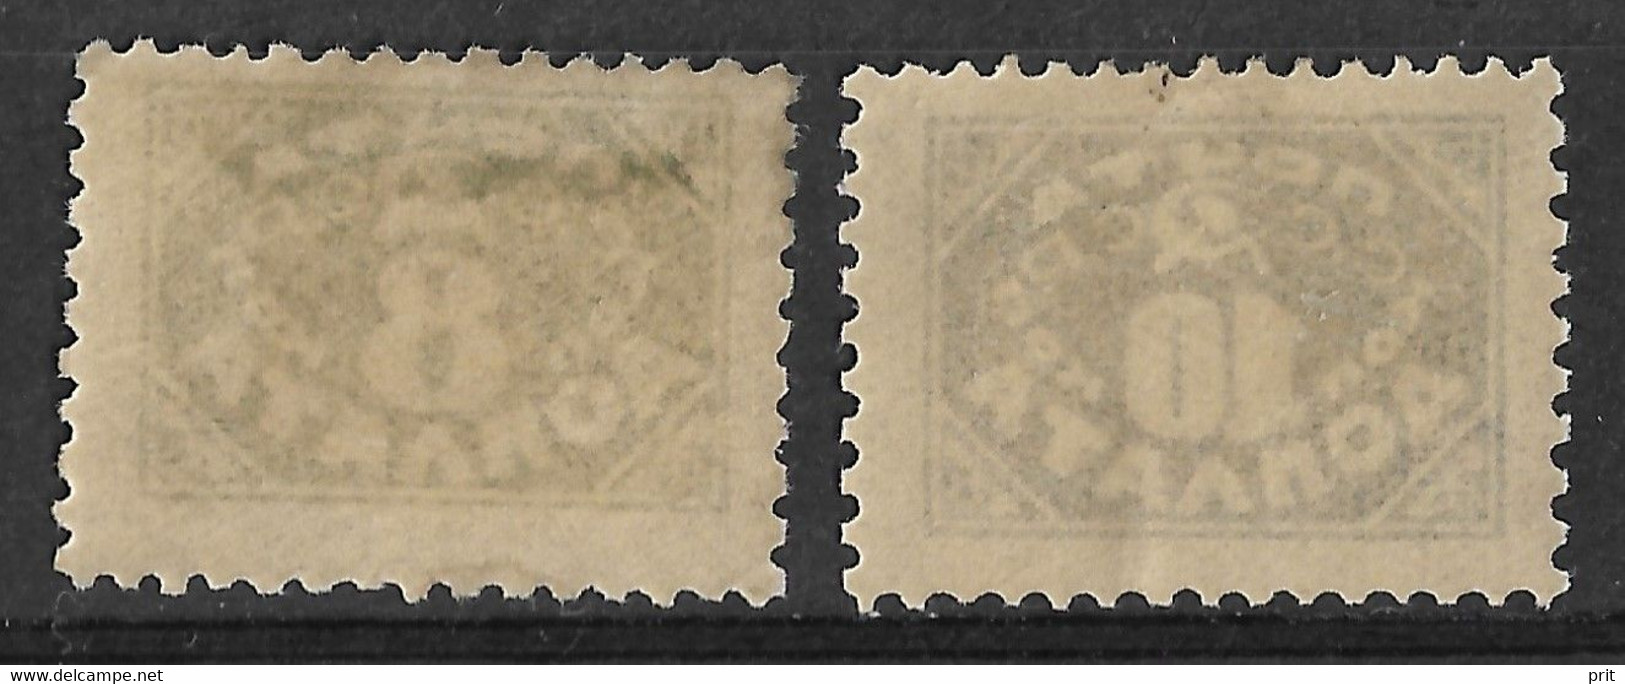 Russia 1925, 8 & 10Kop Postage Due Stamps, Perf 12, Without Watermark, Michel Portomarken 15-16 IA/Sc J15-J16. MLH - Postage Due